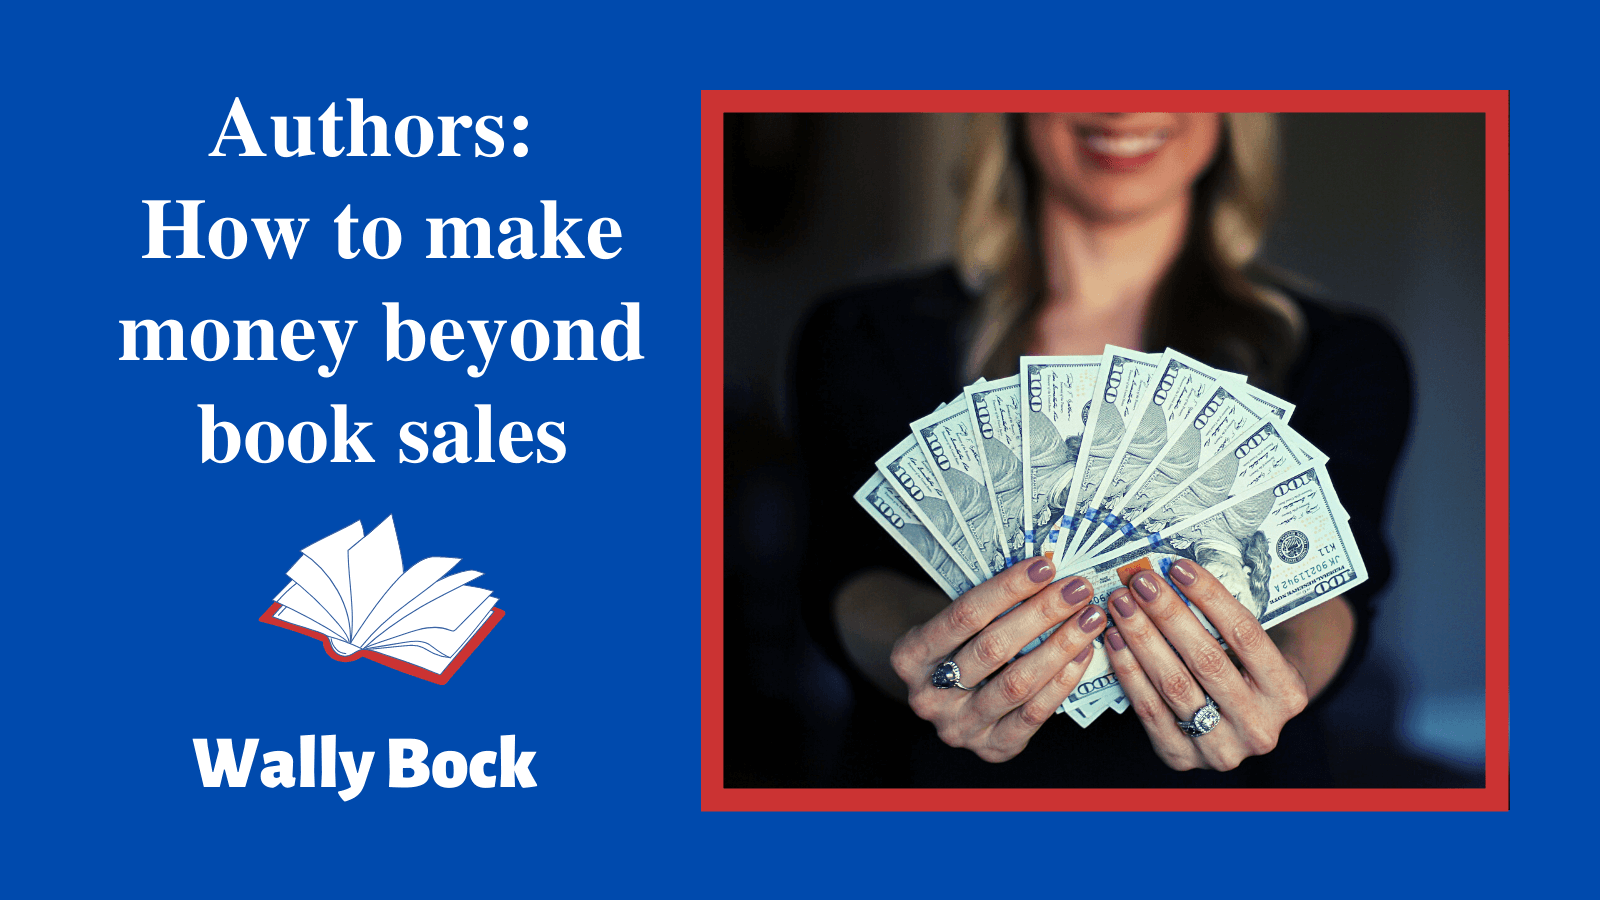 Authors: How to make money beyond book sales